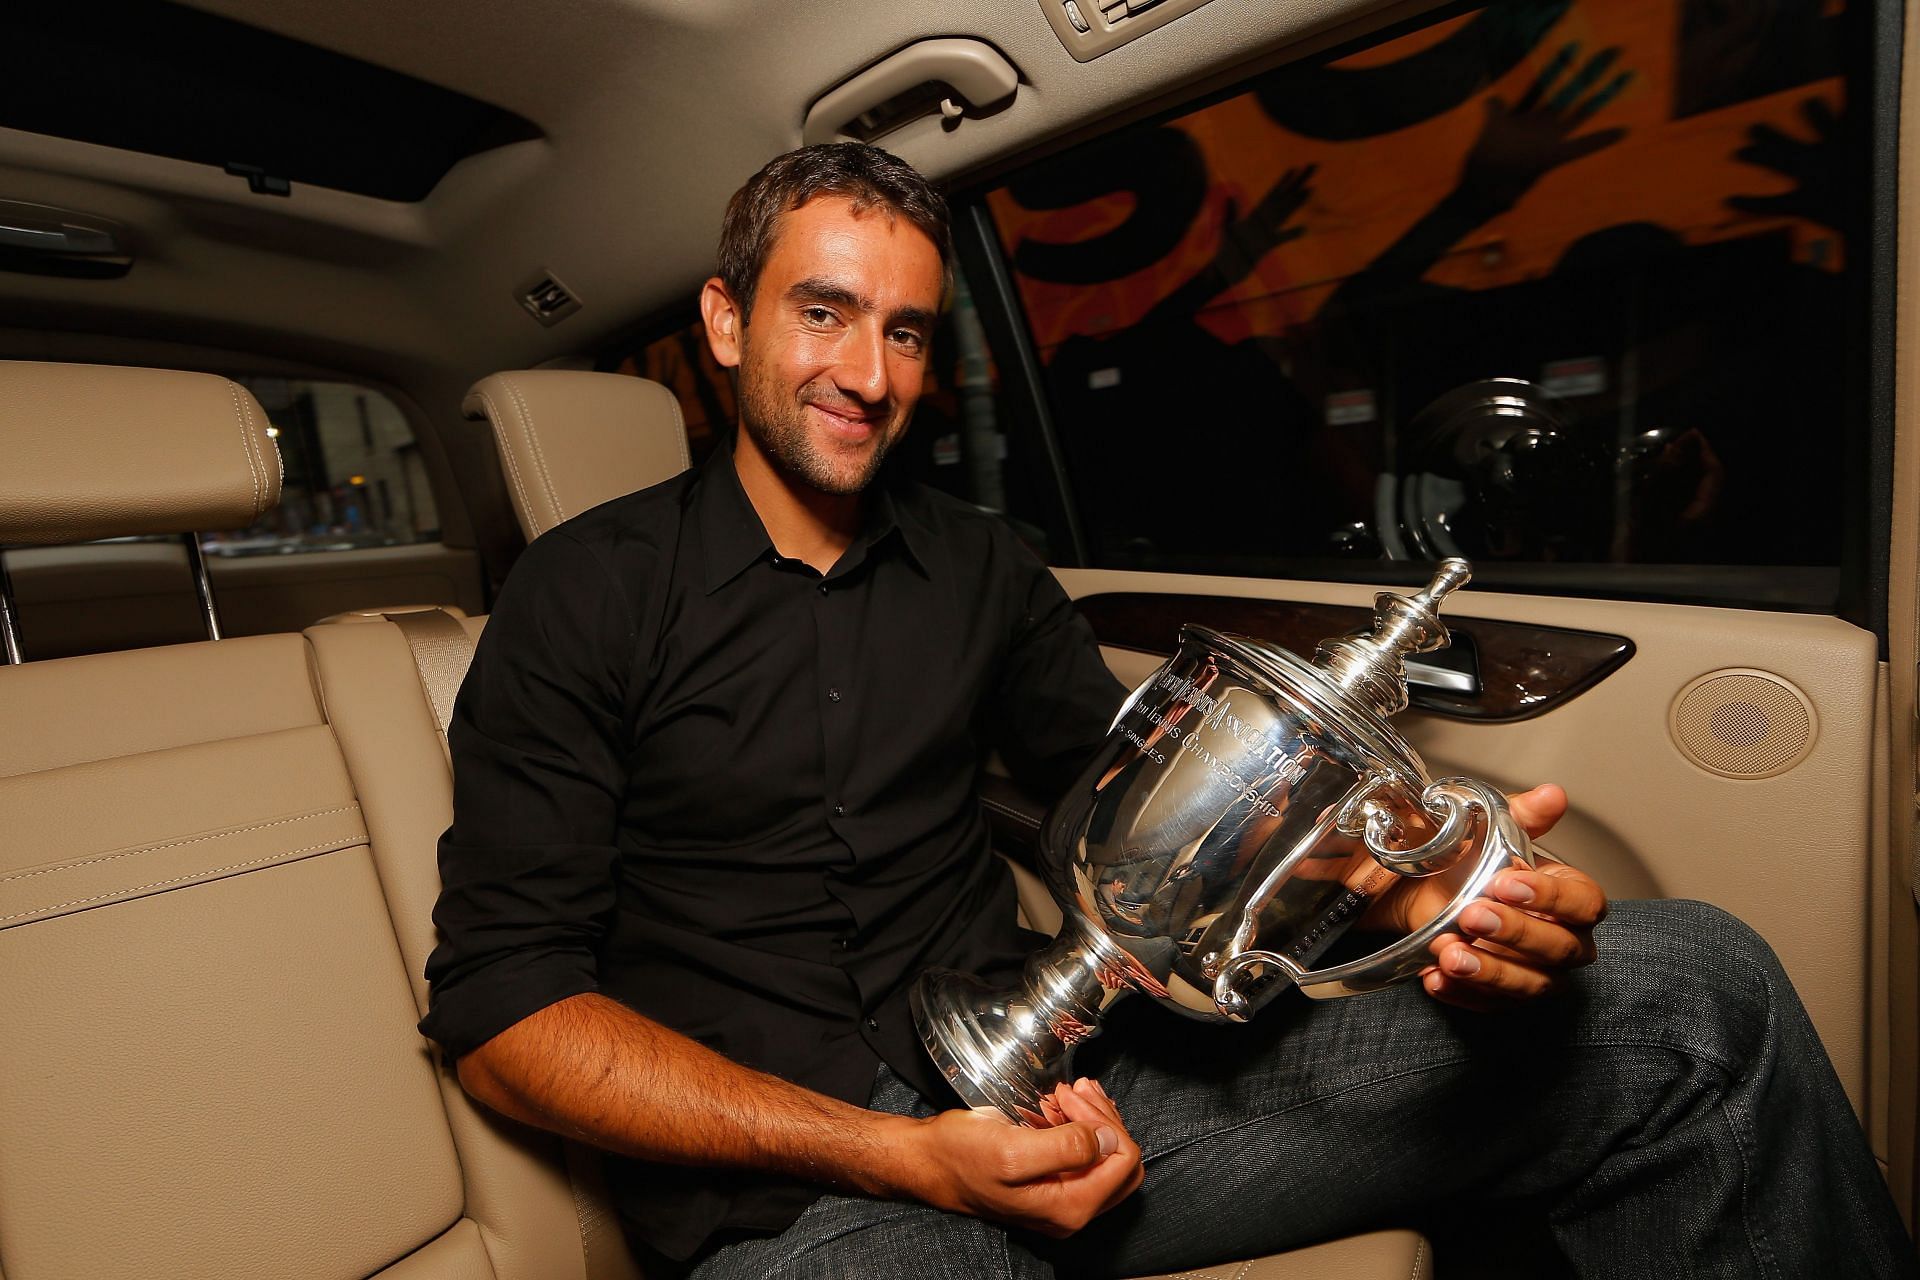 2014 US Open Champion Marin Cilic New York City Trophy Tour